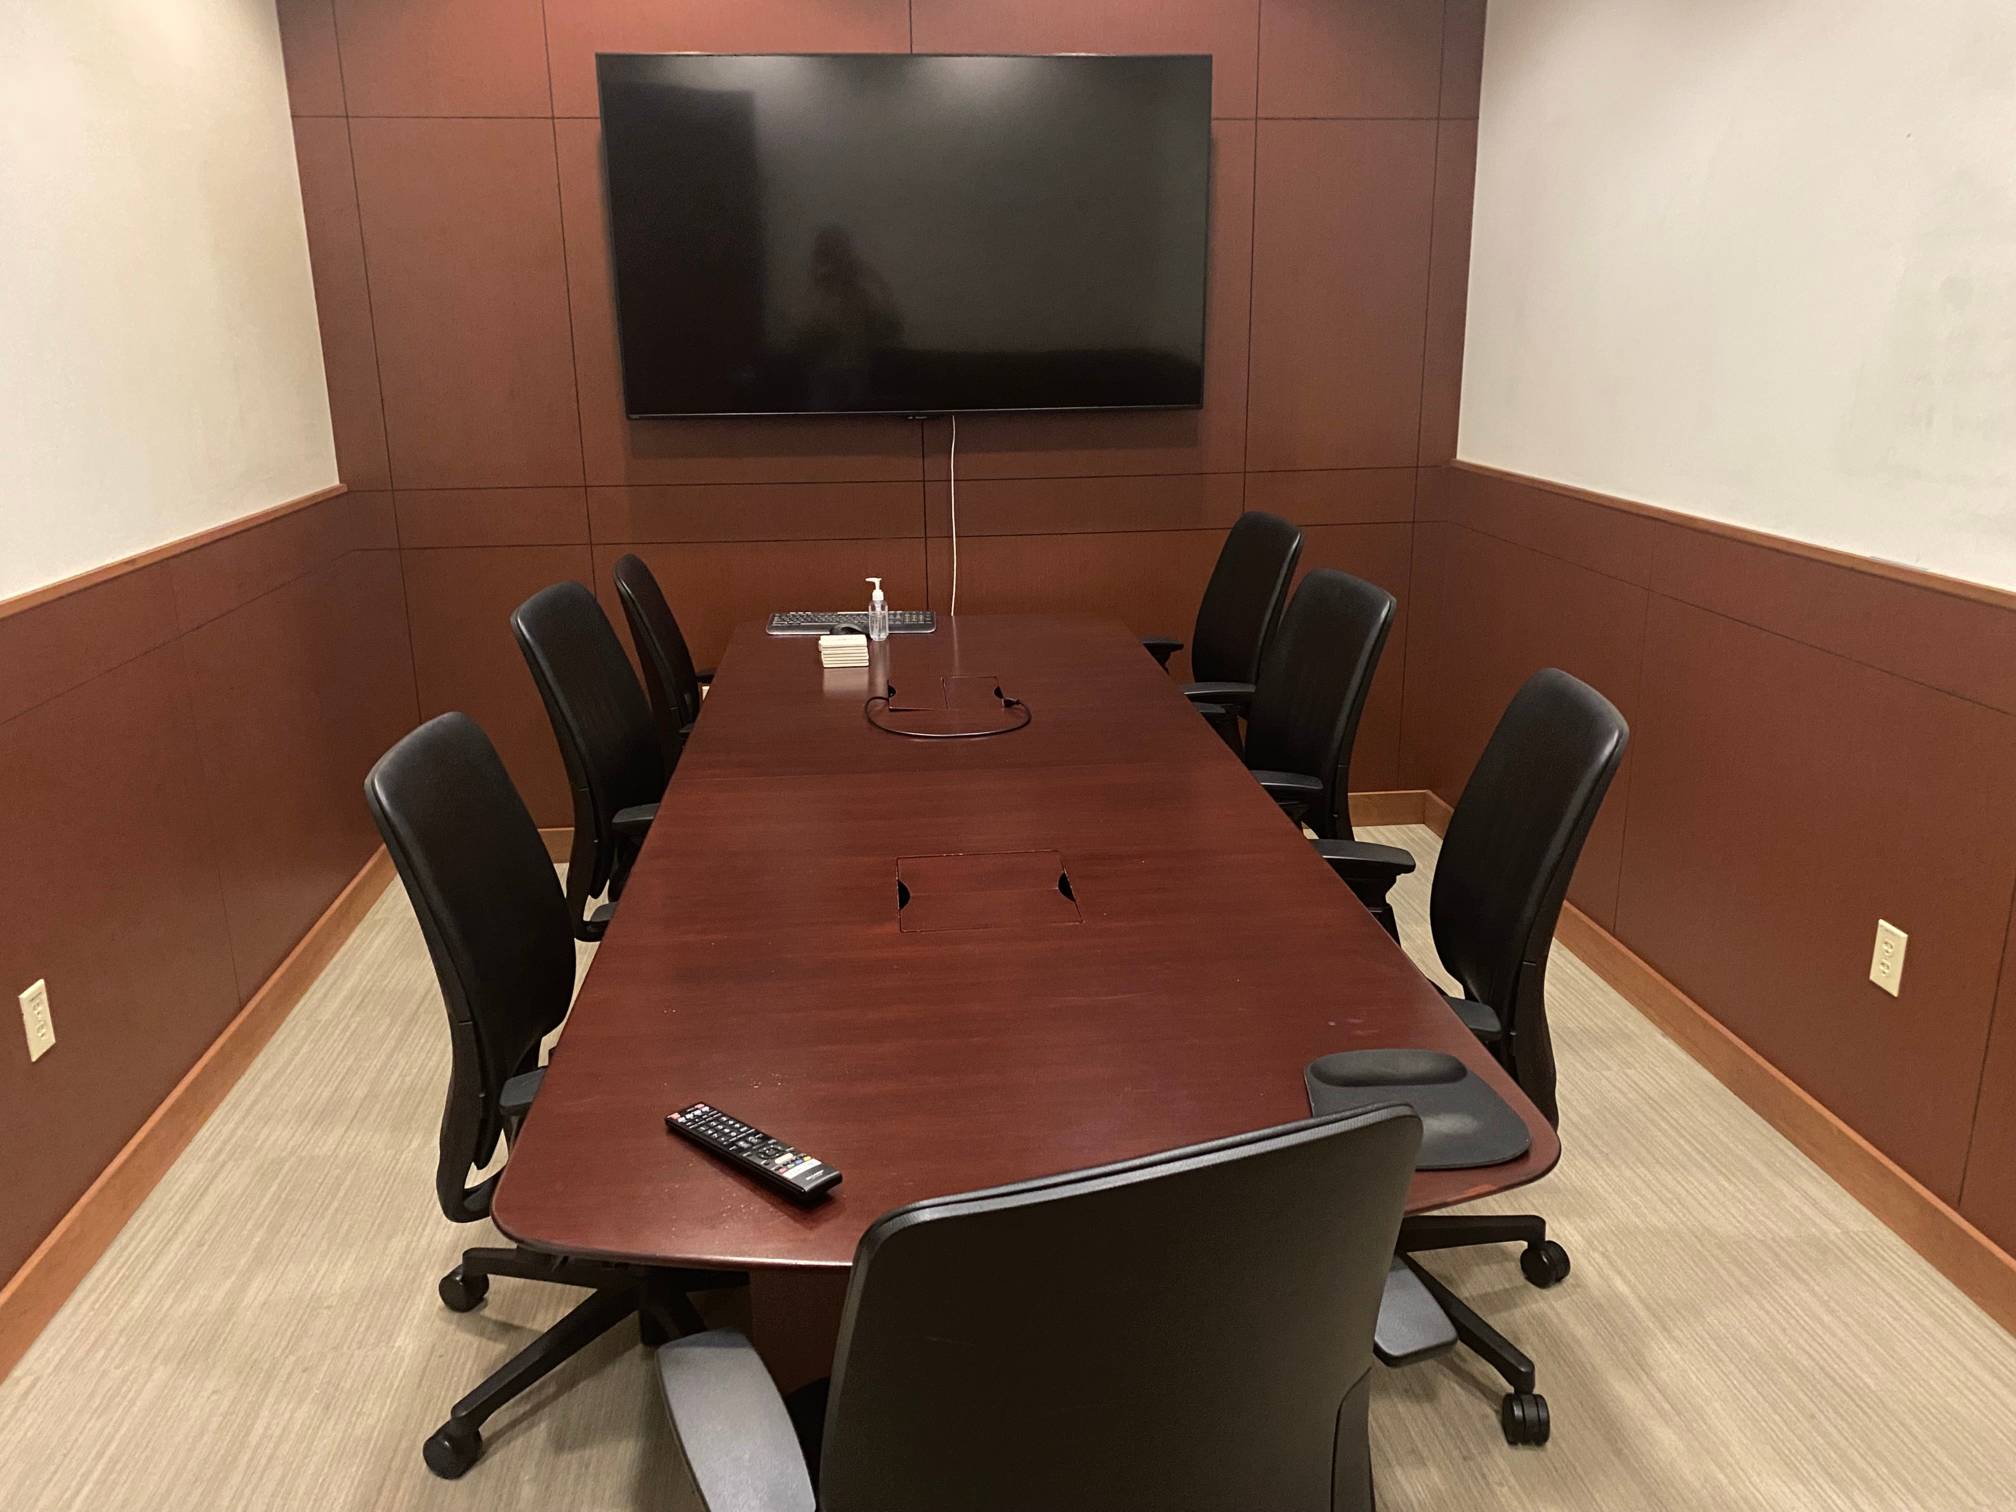 Conference room 146